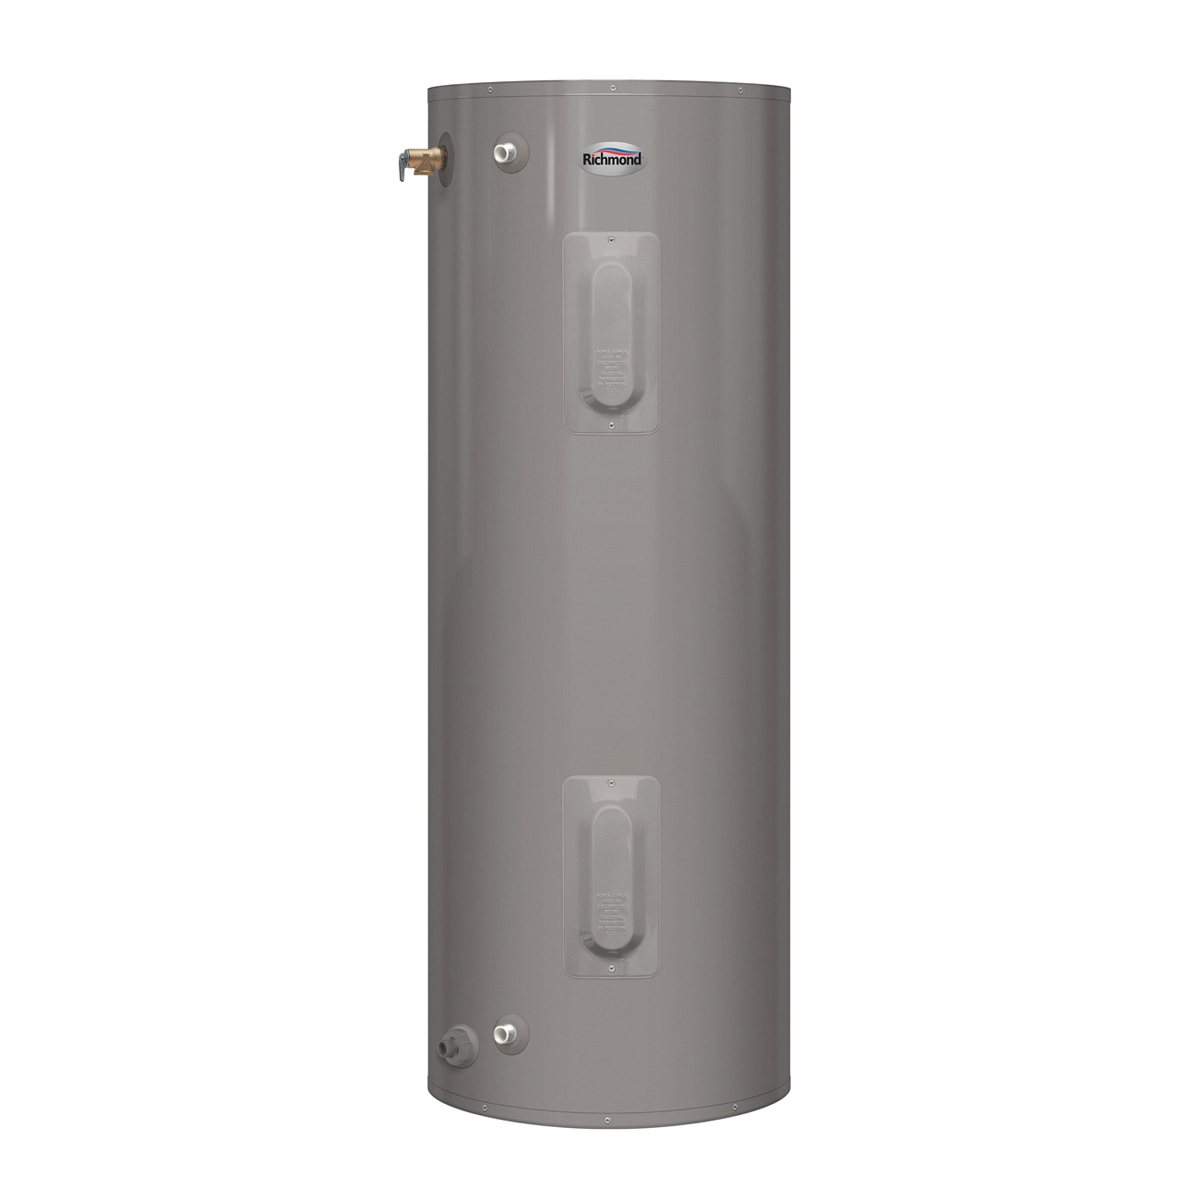 Essential Series T2V30-D Electric Water Heater, 240 V, 4500 W, 30 gal Tank, 0.92 Energy Efficiency